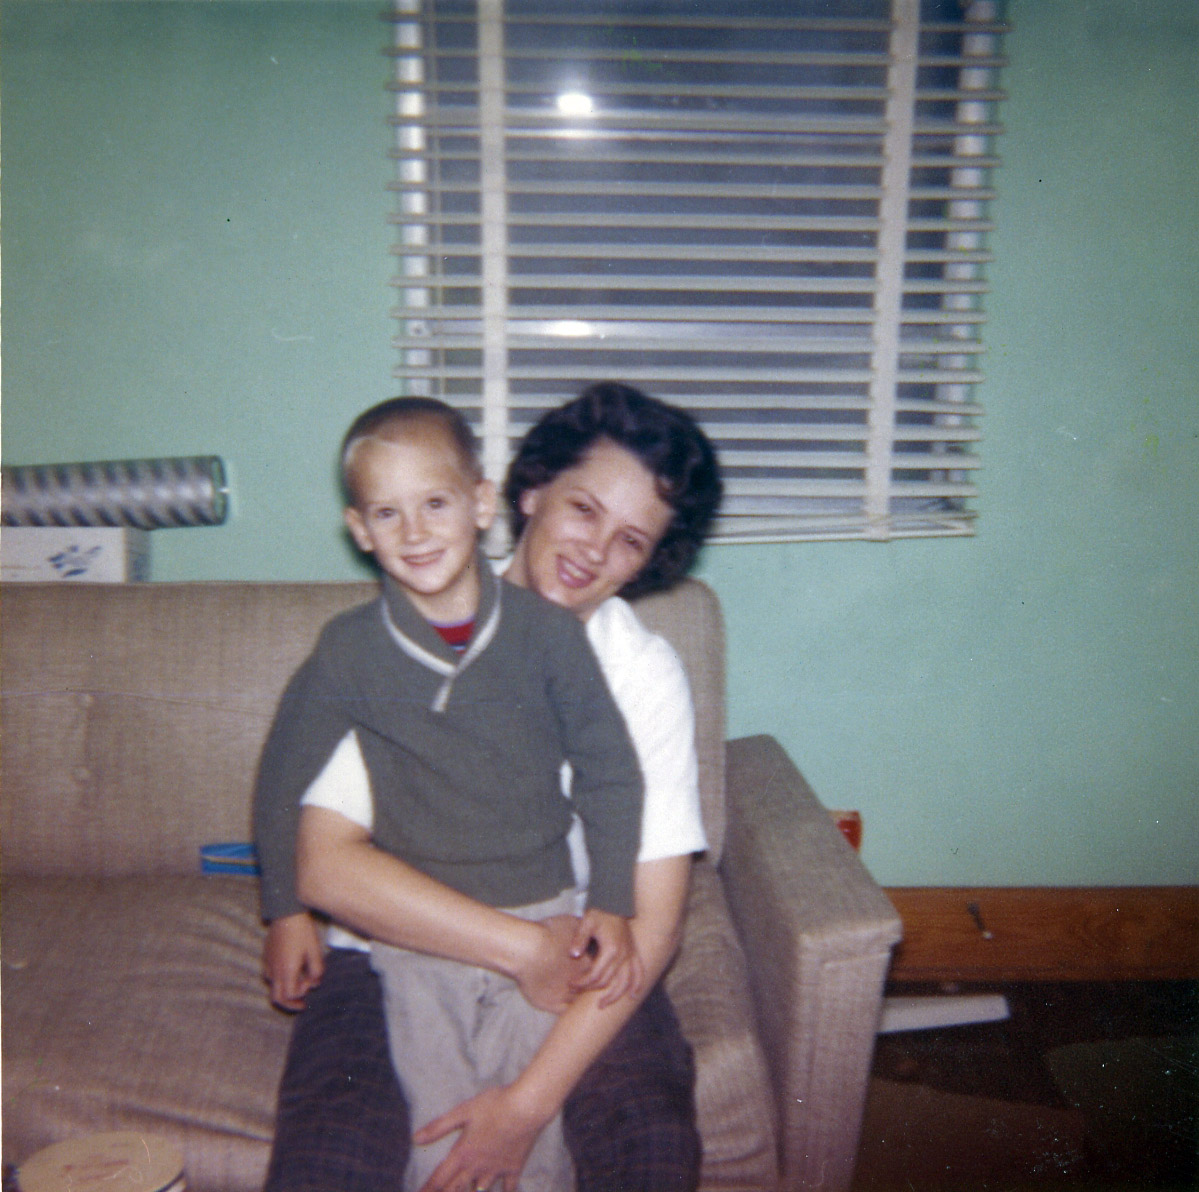 Me and mama at my grandmother's house which was right next door to Granddaddy's house in Fort Walton Beach, Florida.  I called him Granddaddy because Mama called him Daddy.  He was actually my great-grandfather, grandmother's father. (whew)